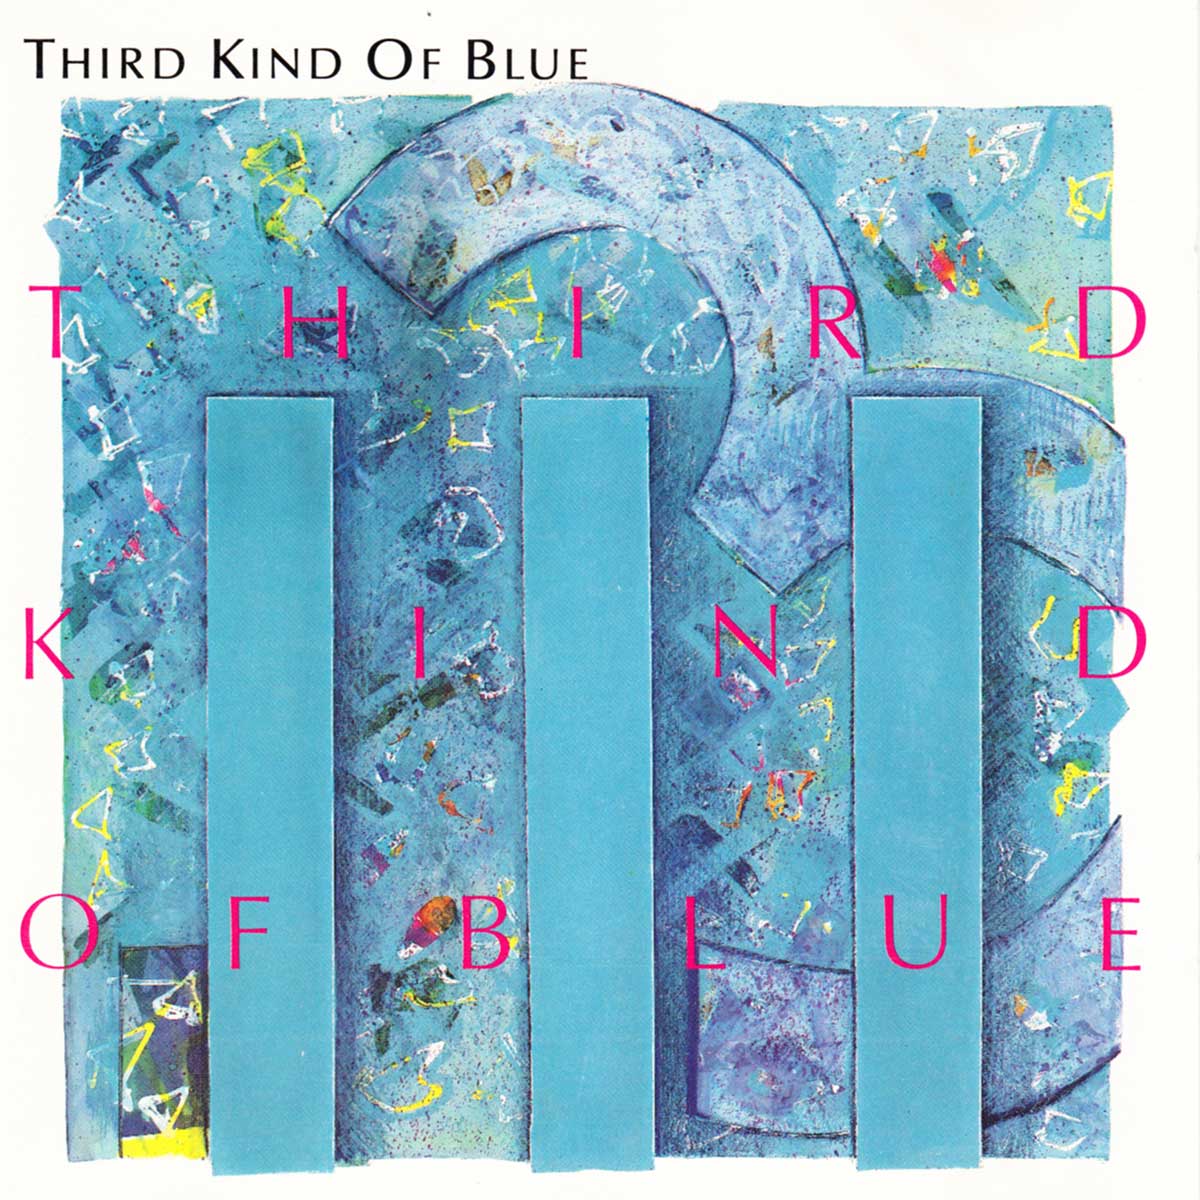 Third Kind of Blue